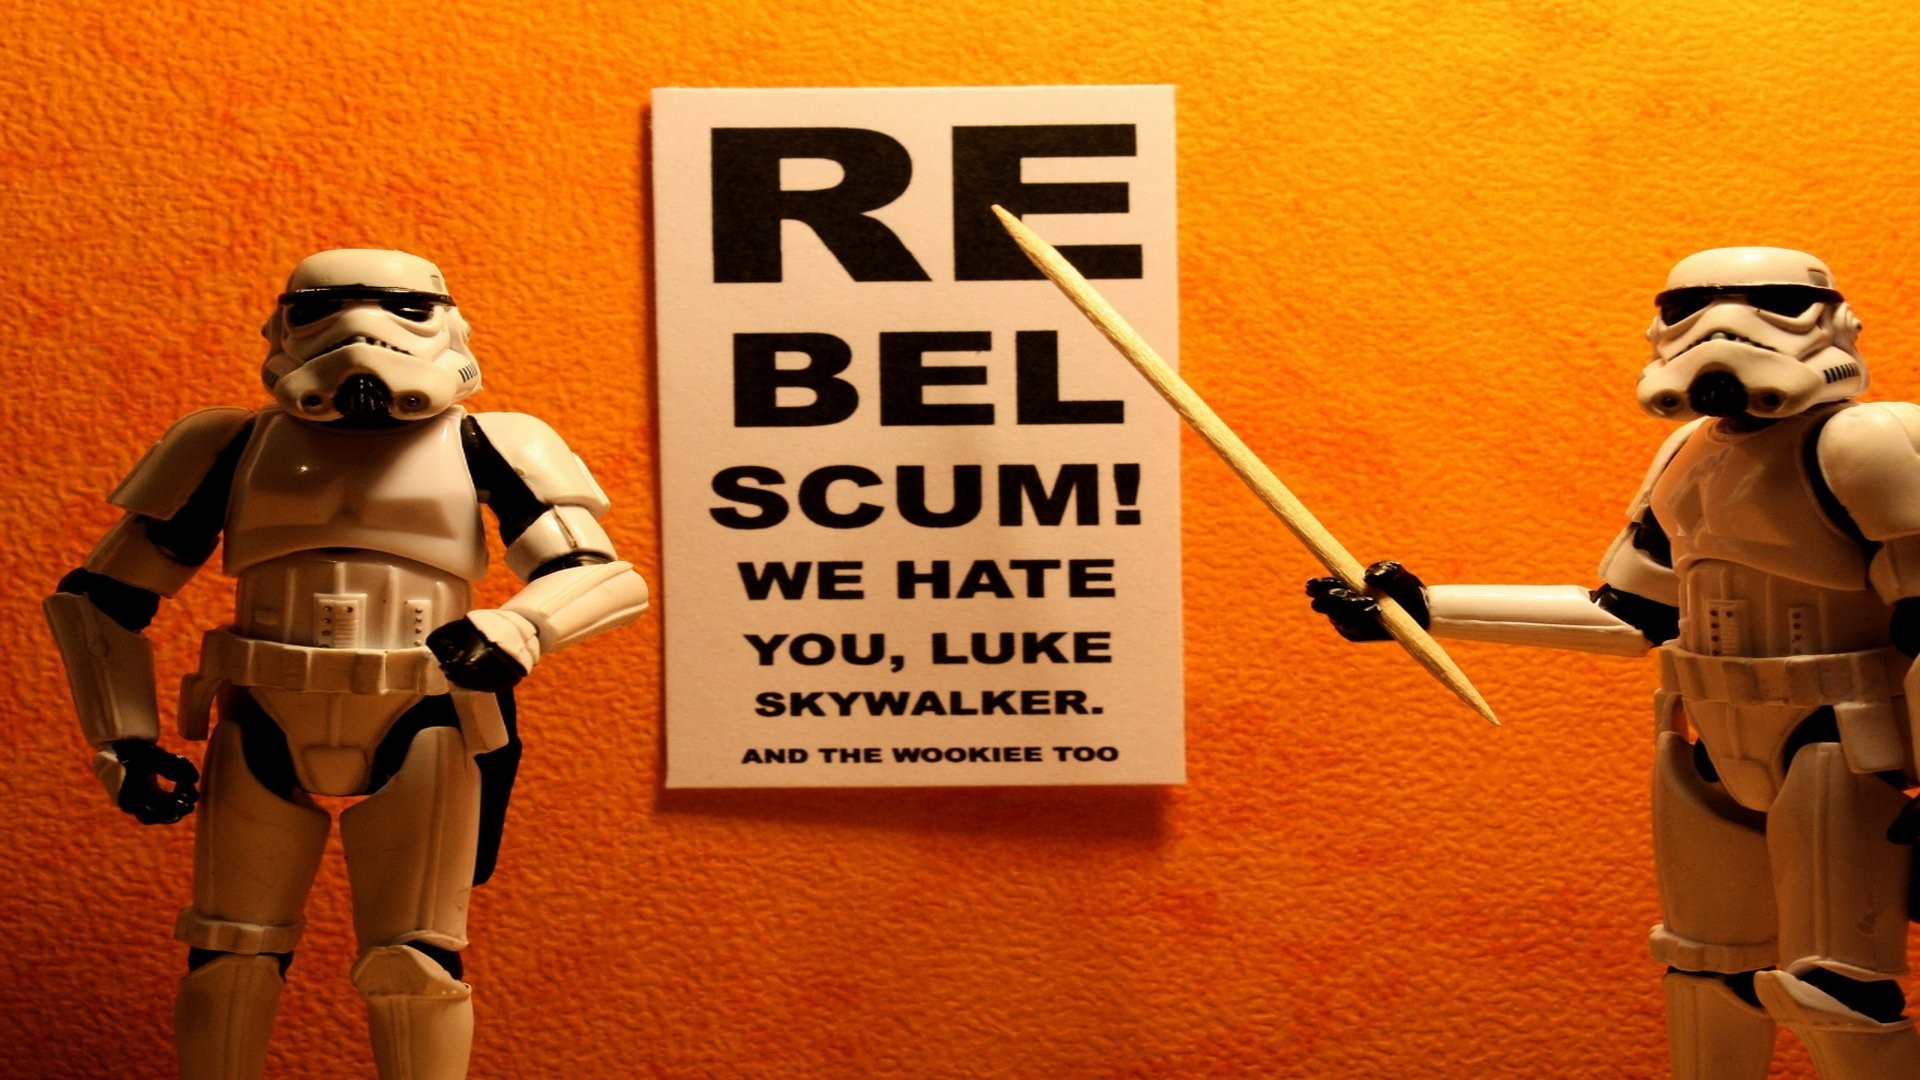 Funny Star Wars Wallpapers.